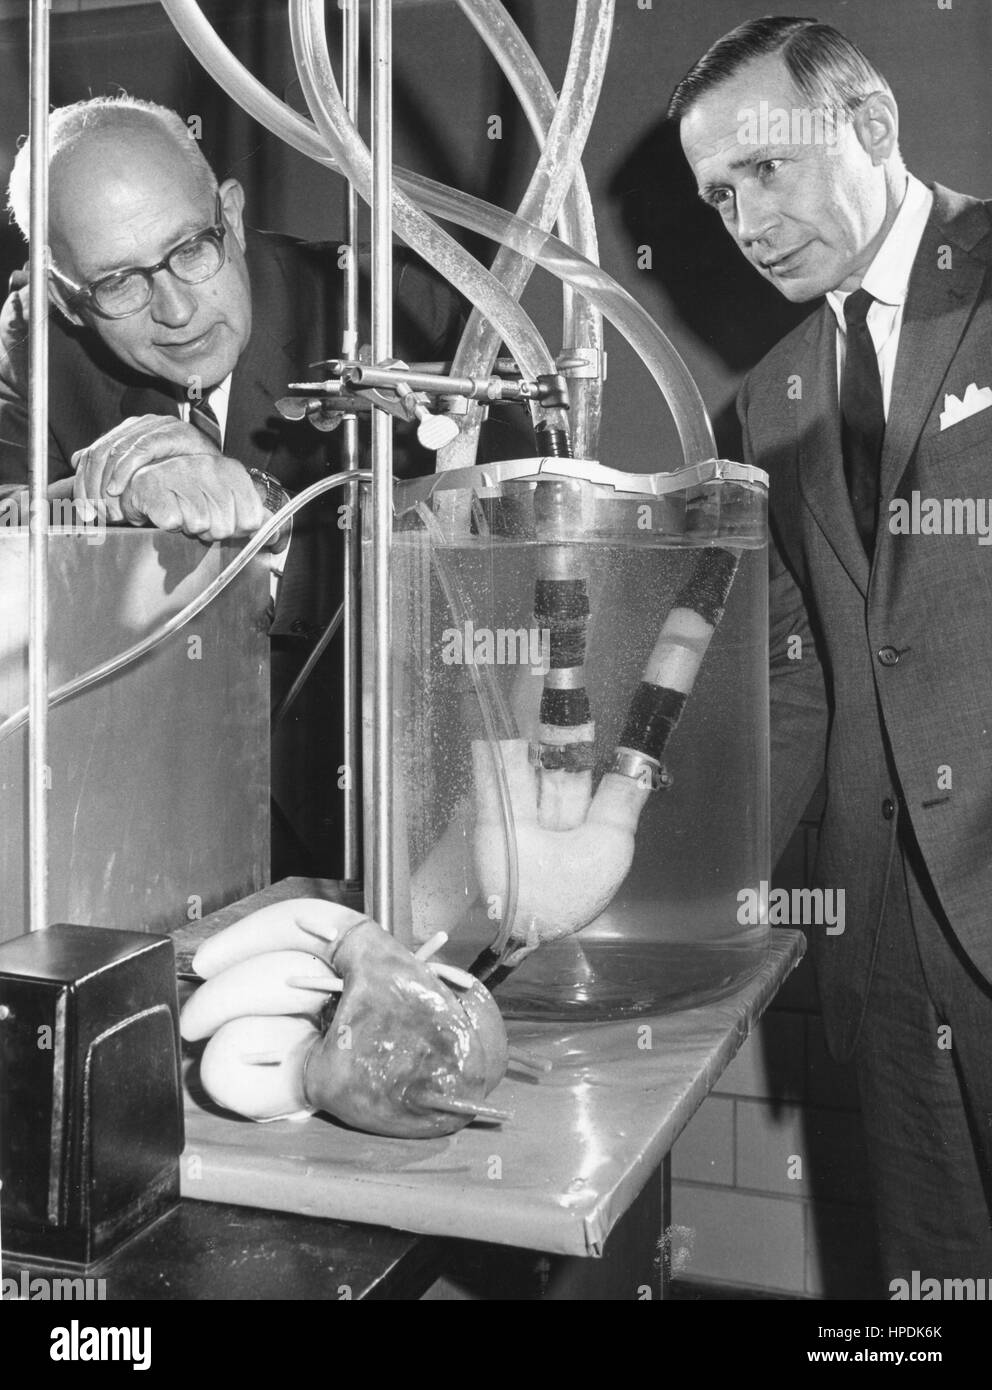 Prototype of the artificial heart developed by Dr Michael DeBakey (left) and his associate, Dr George C Morris, Jr (right), Akron, Ohio, 1966. Stock Photo